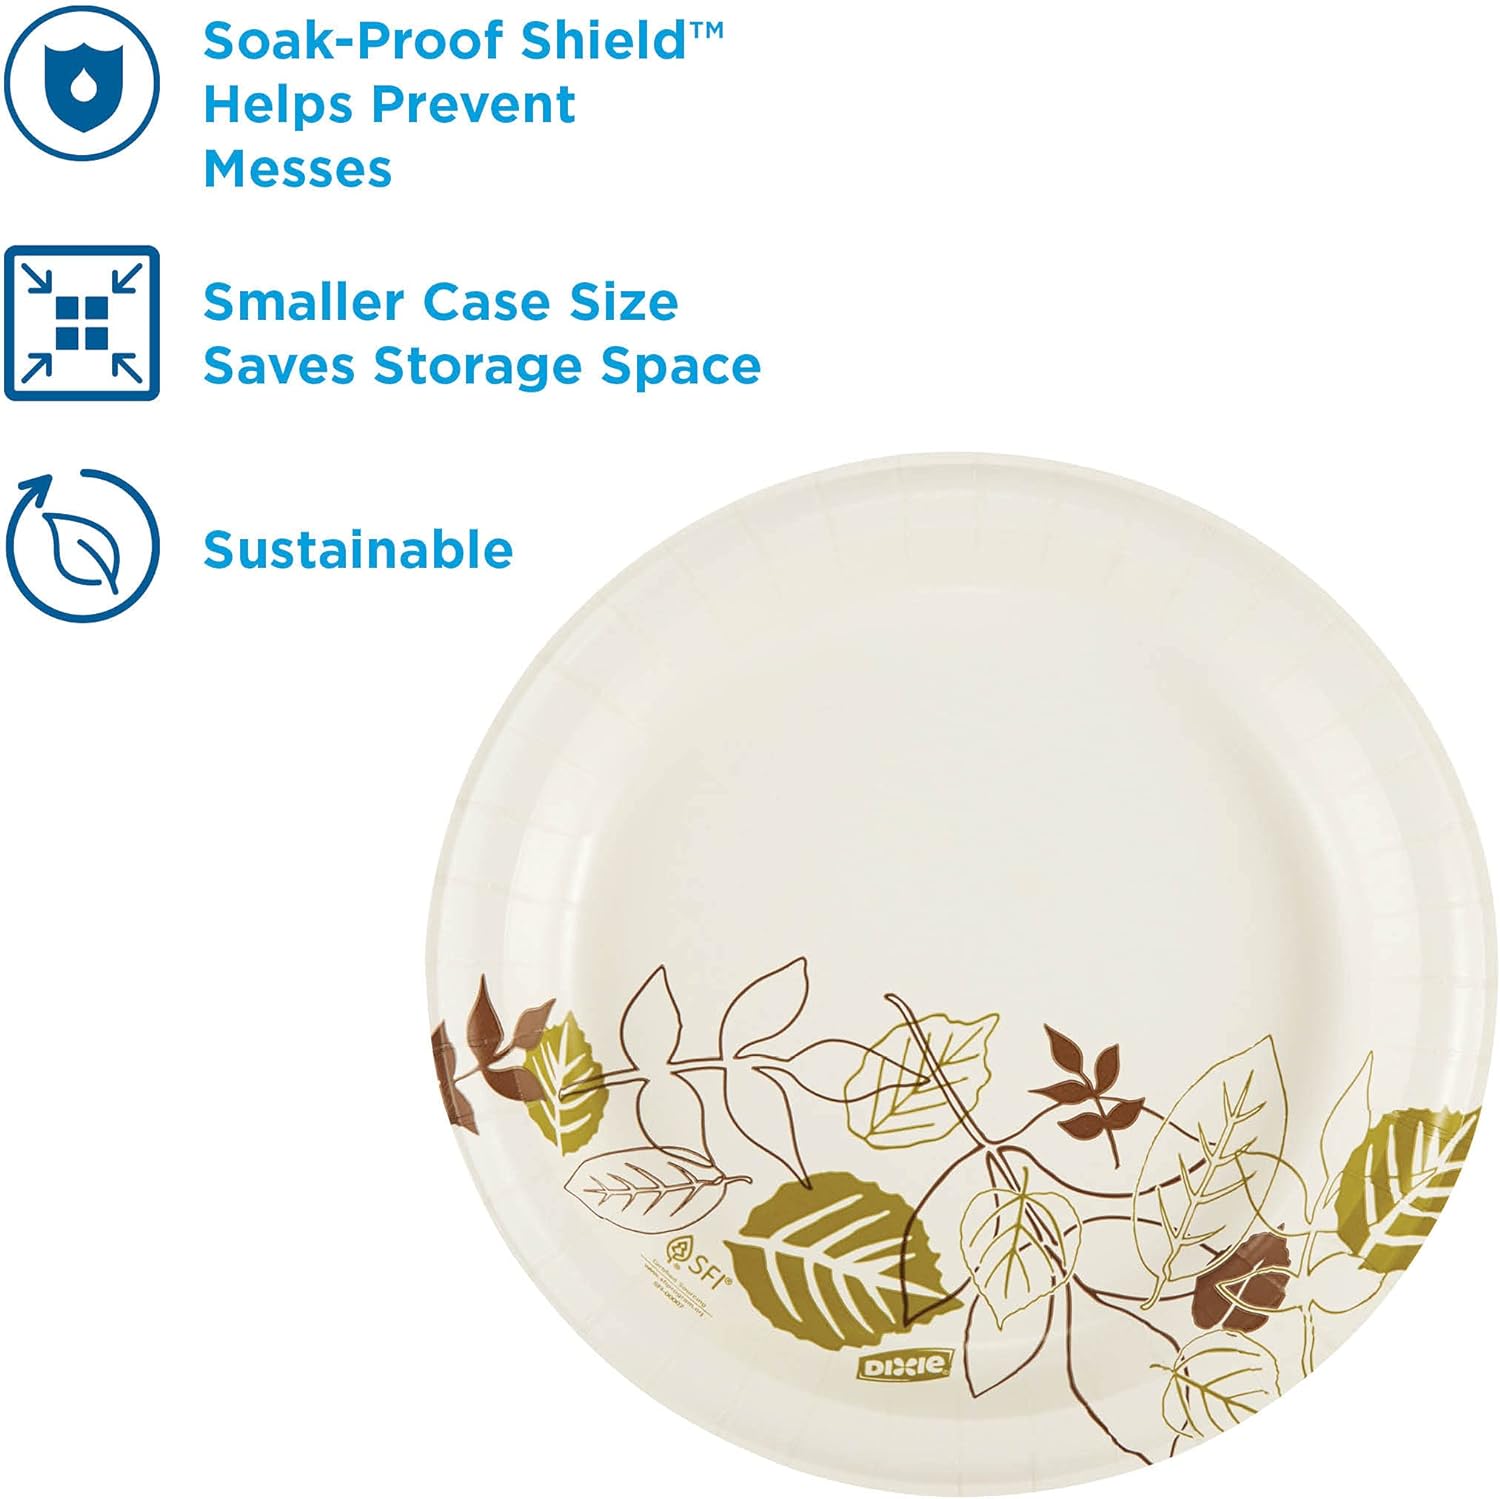 Georgia-Pacific Dixie 8.5 Medium-Weight Paper Plates by GP PRO